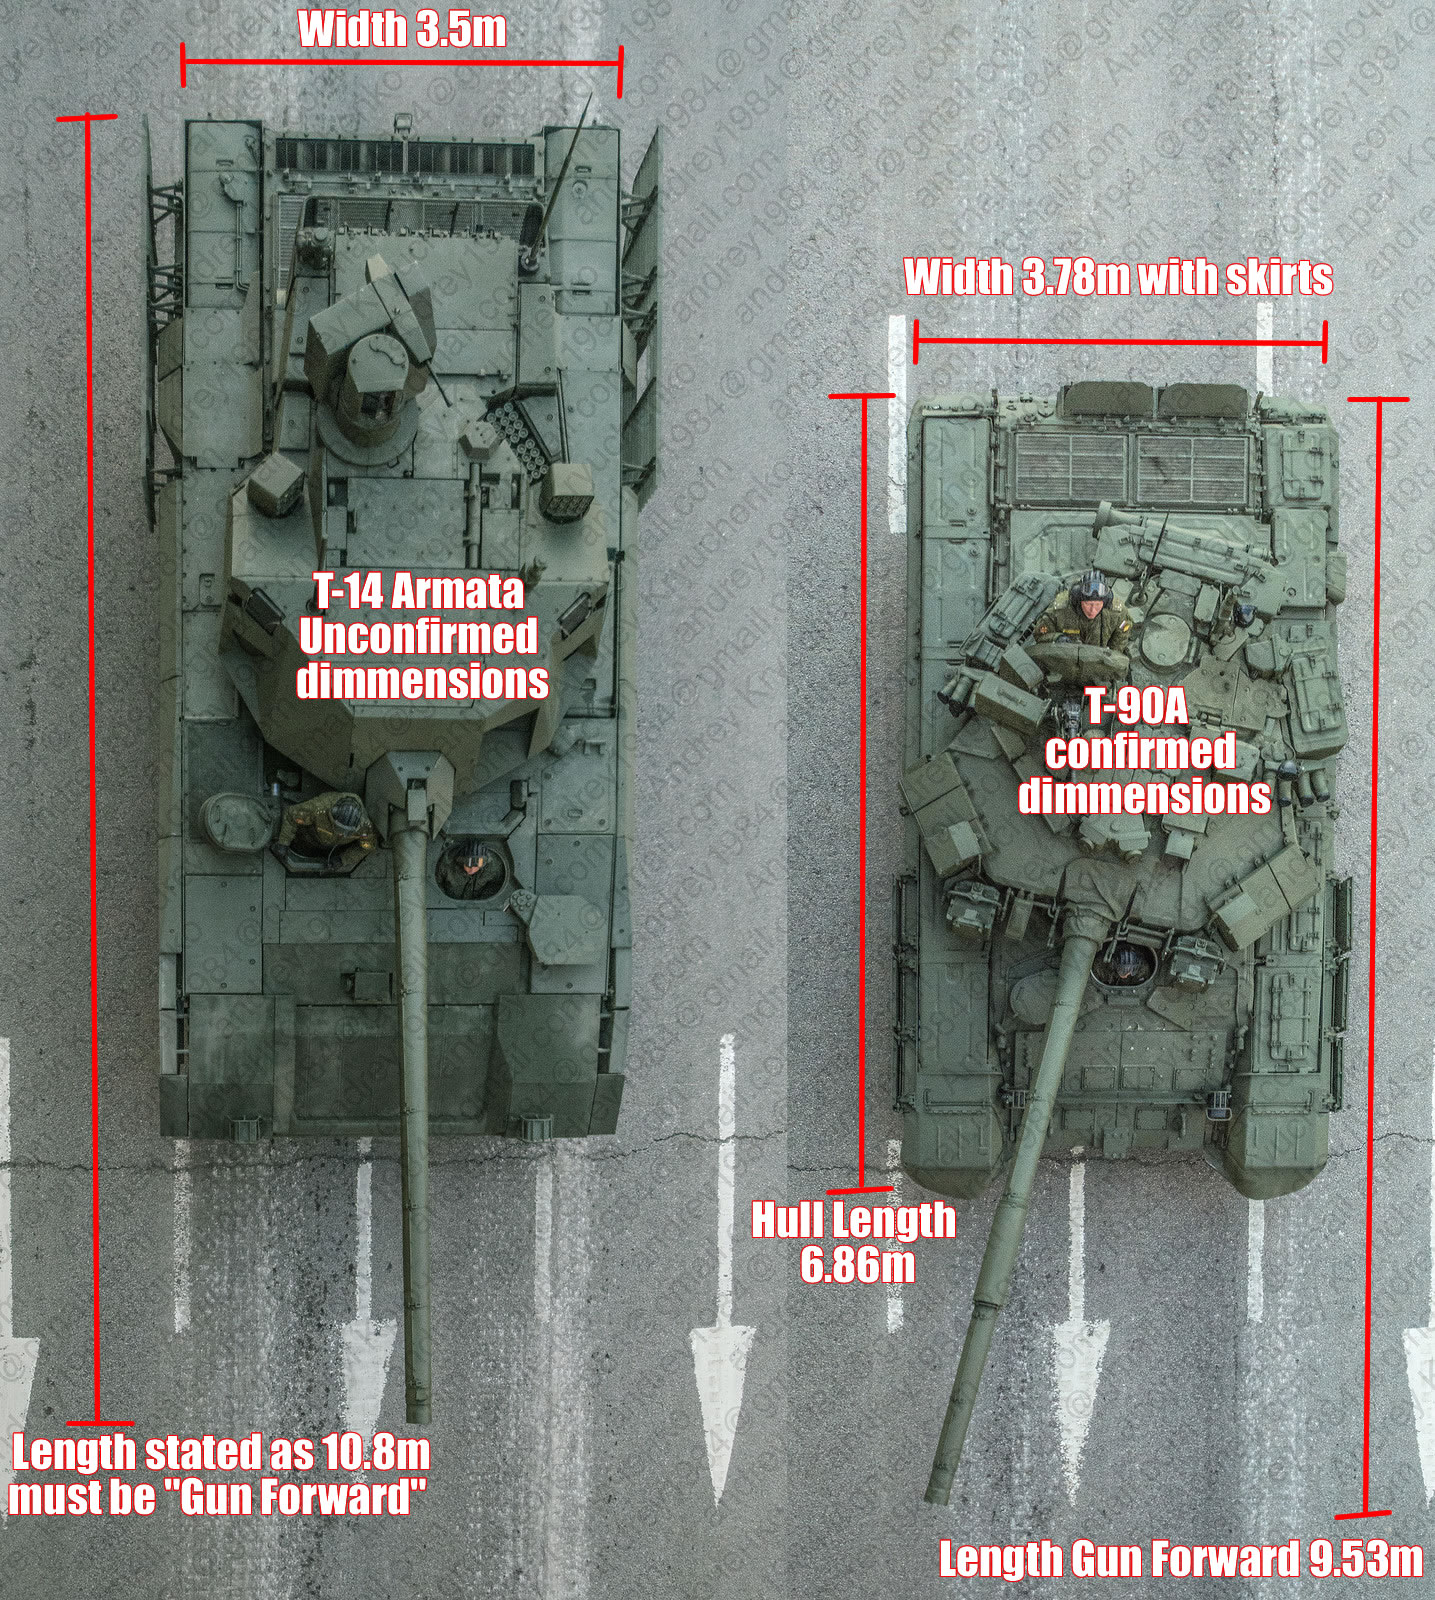 T-14-Armata-Tank-Dimmensions-compered.jpg